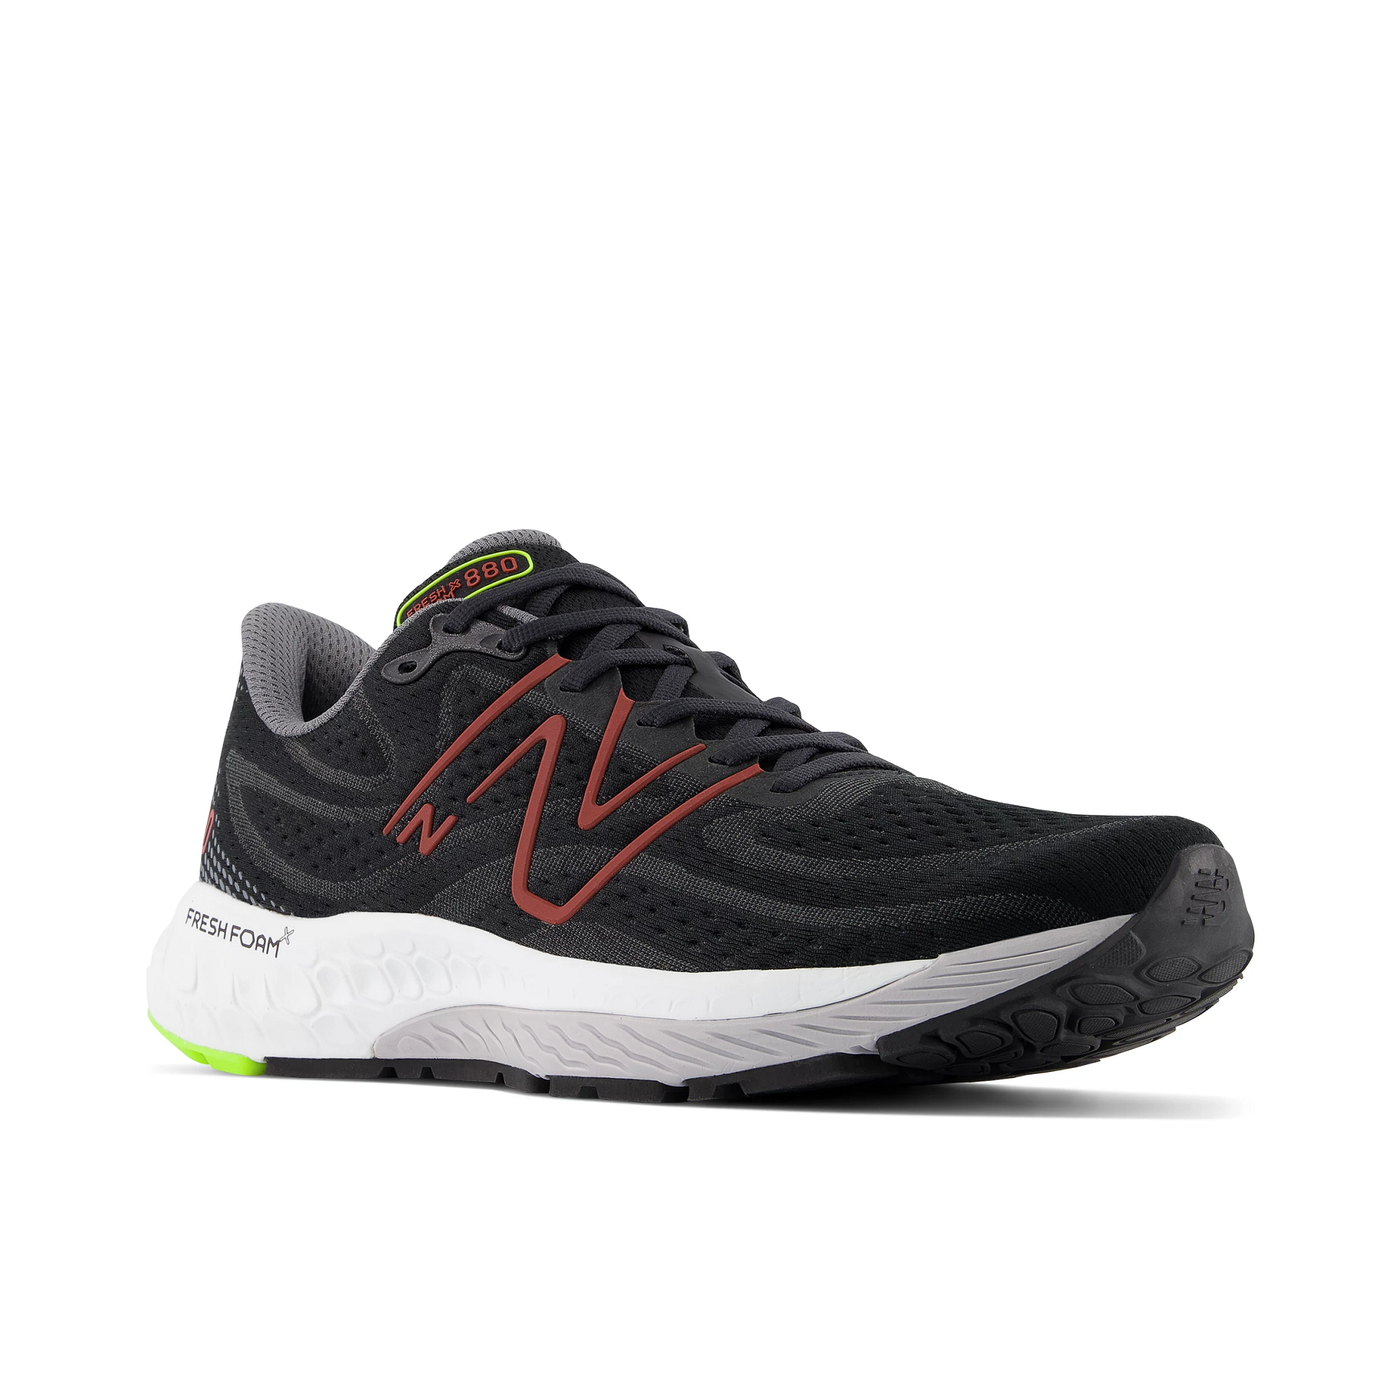 New Balance Mens 880V13 Wide - 2E Width - Black/Red Synthetic - Neutral